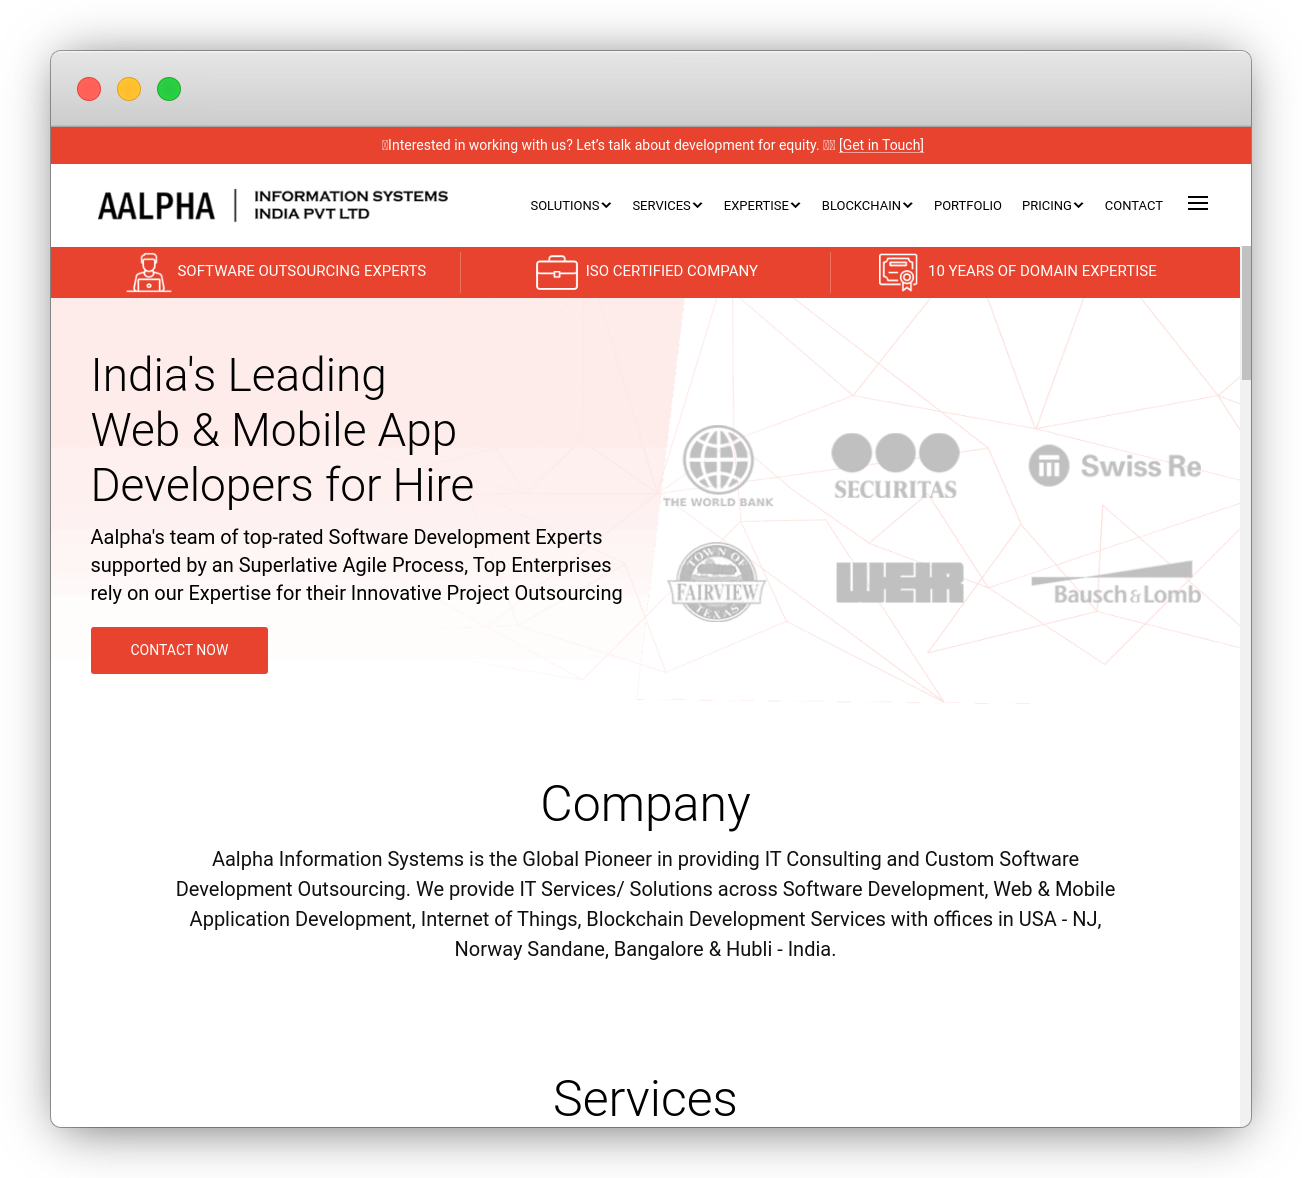 Aalpha Information Systems